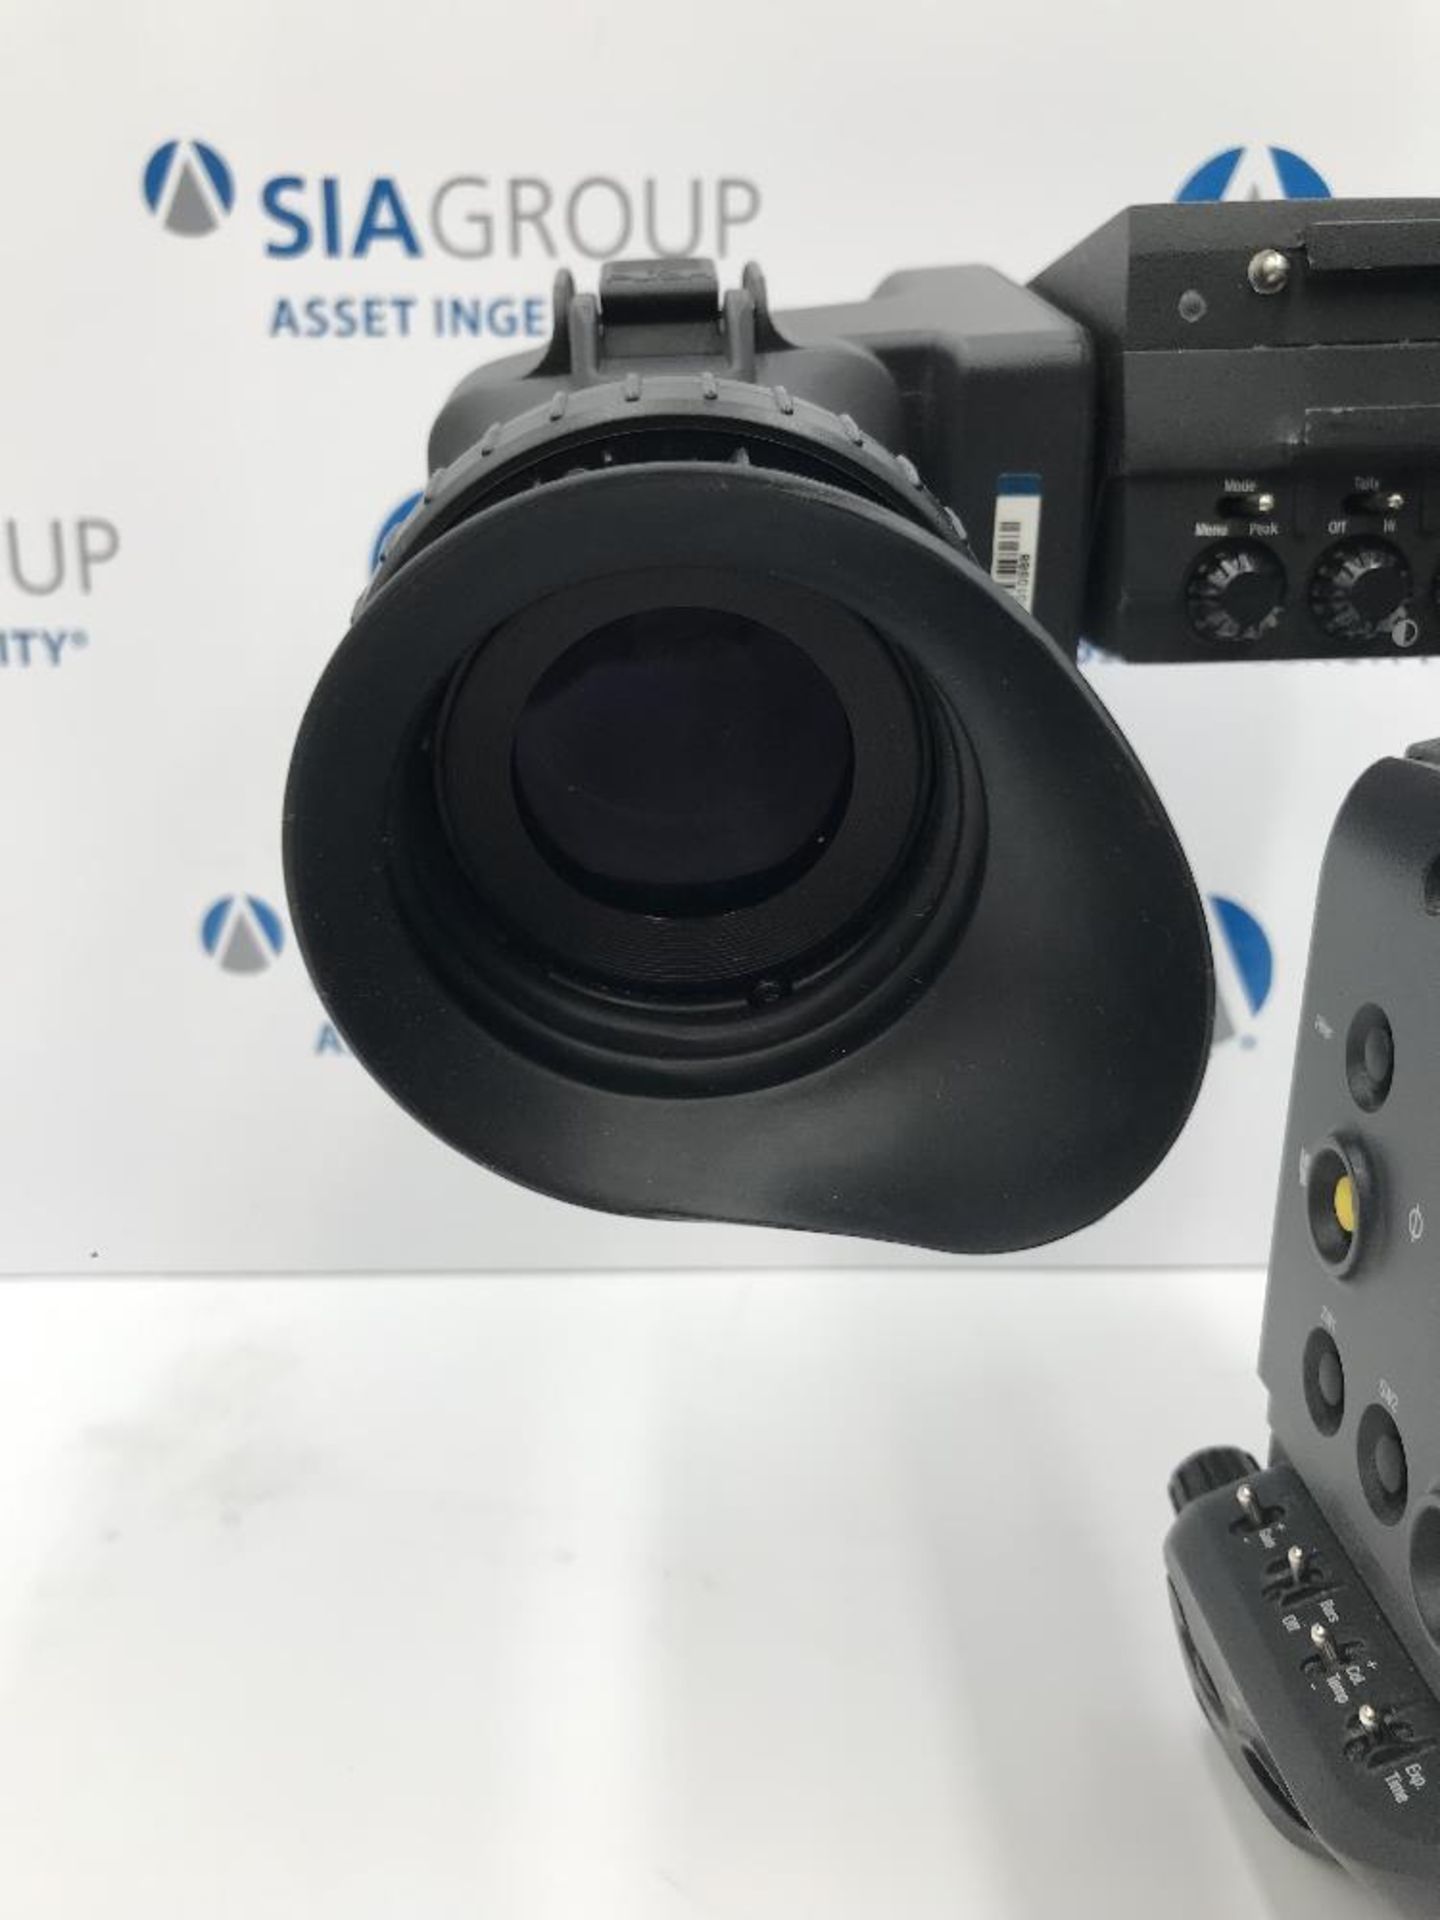 Grass Valley LDX 86N Universe 4K Camera with 7.4'' OLED Viewfinder & Camera Control Unit - Image 4 of 16